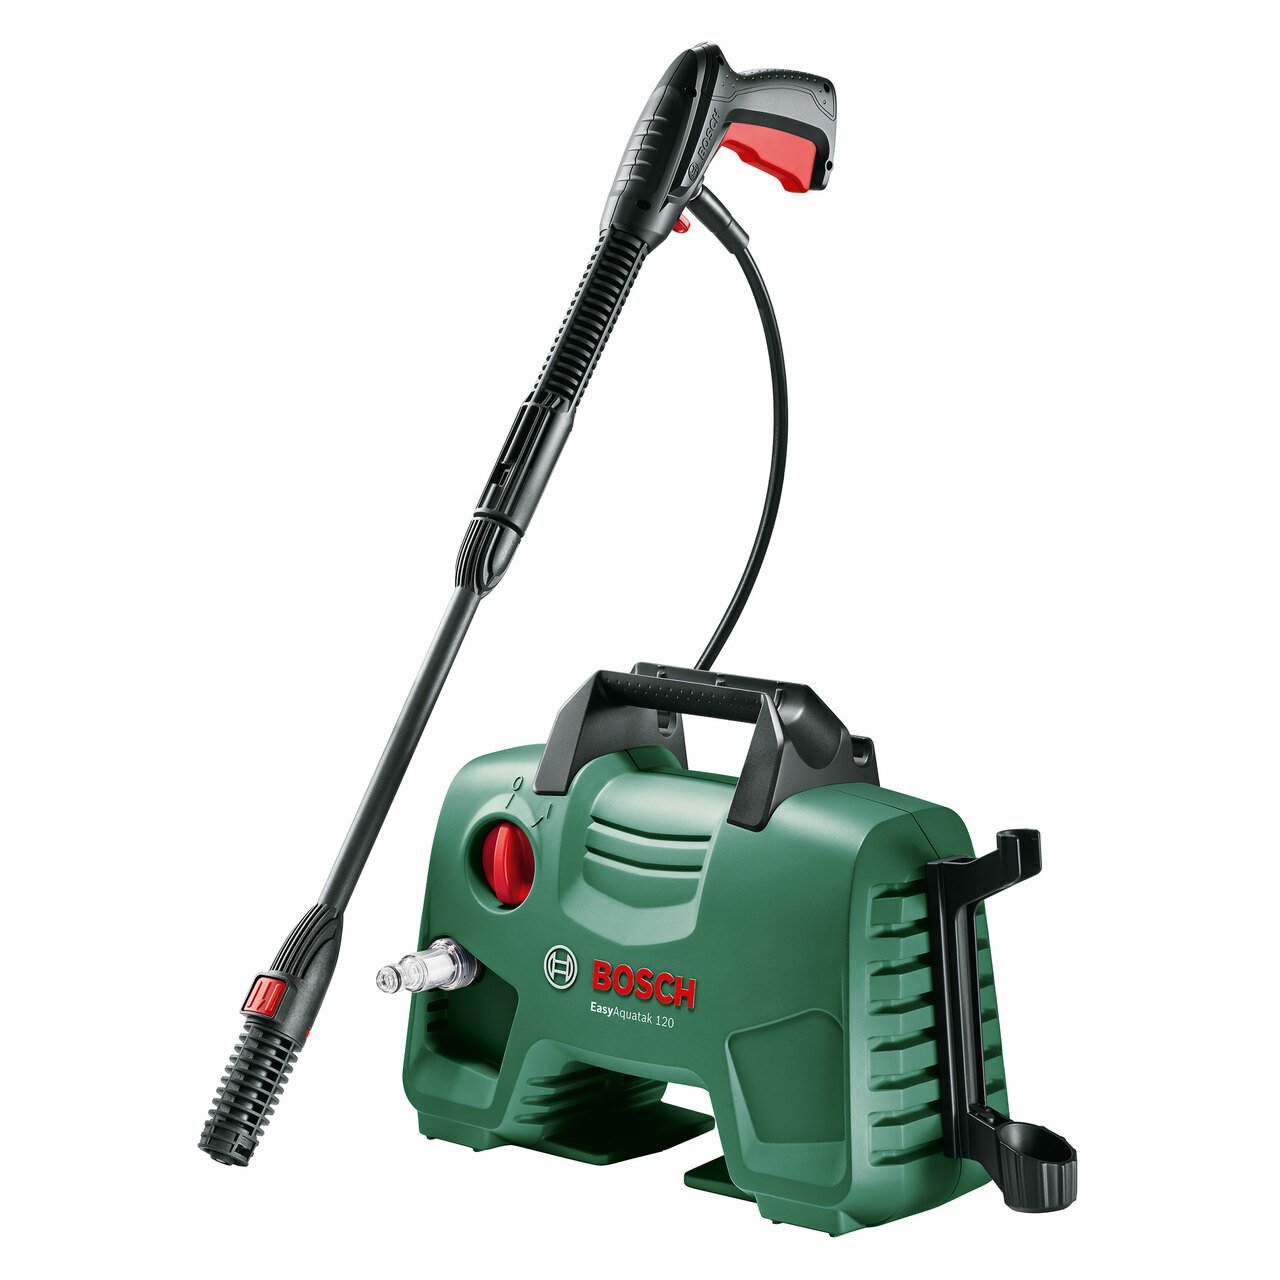 Image of Bosch <br><strong>EasyAquatak120 High Pressure Washer 120 Bar</strong>